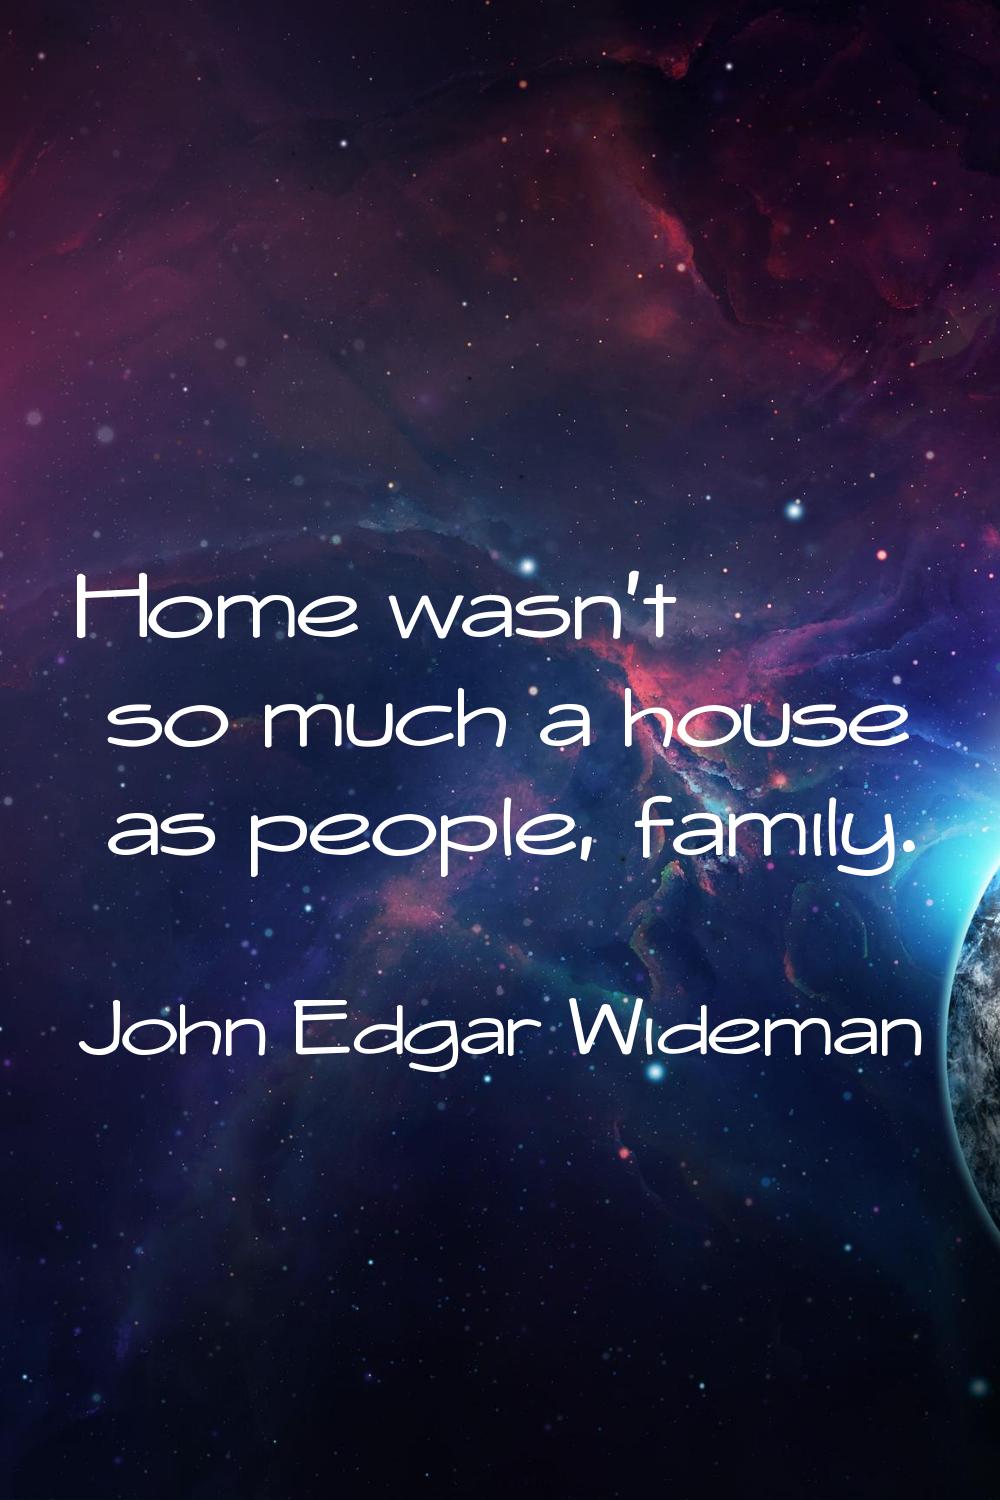 Home wasn't so much a house as people, family.